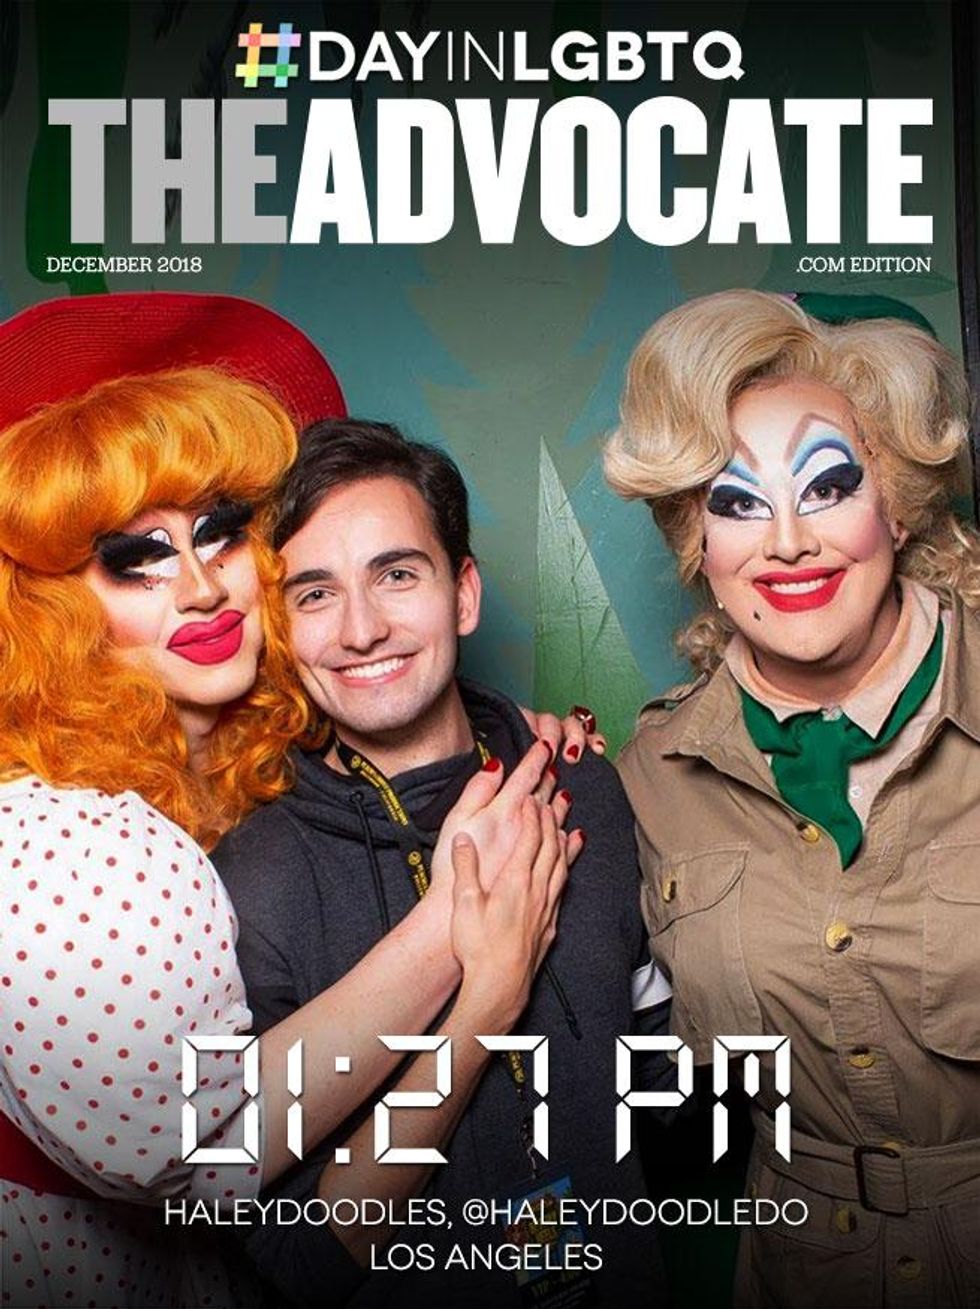 Pm-01-27-haley-theadvocate-2018-dayinlgbt-cover-template-655